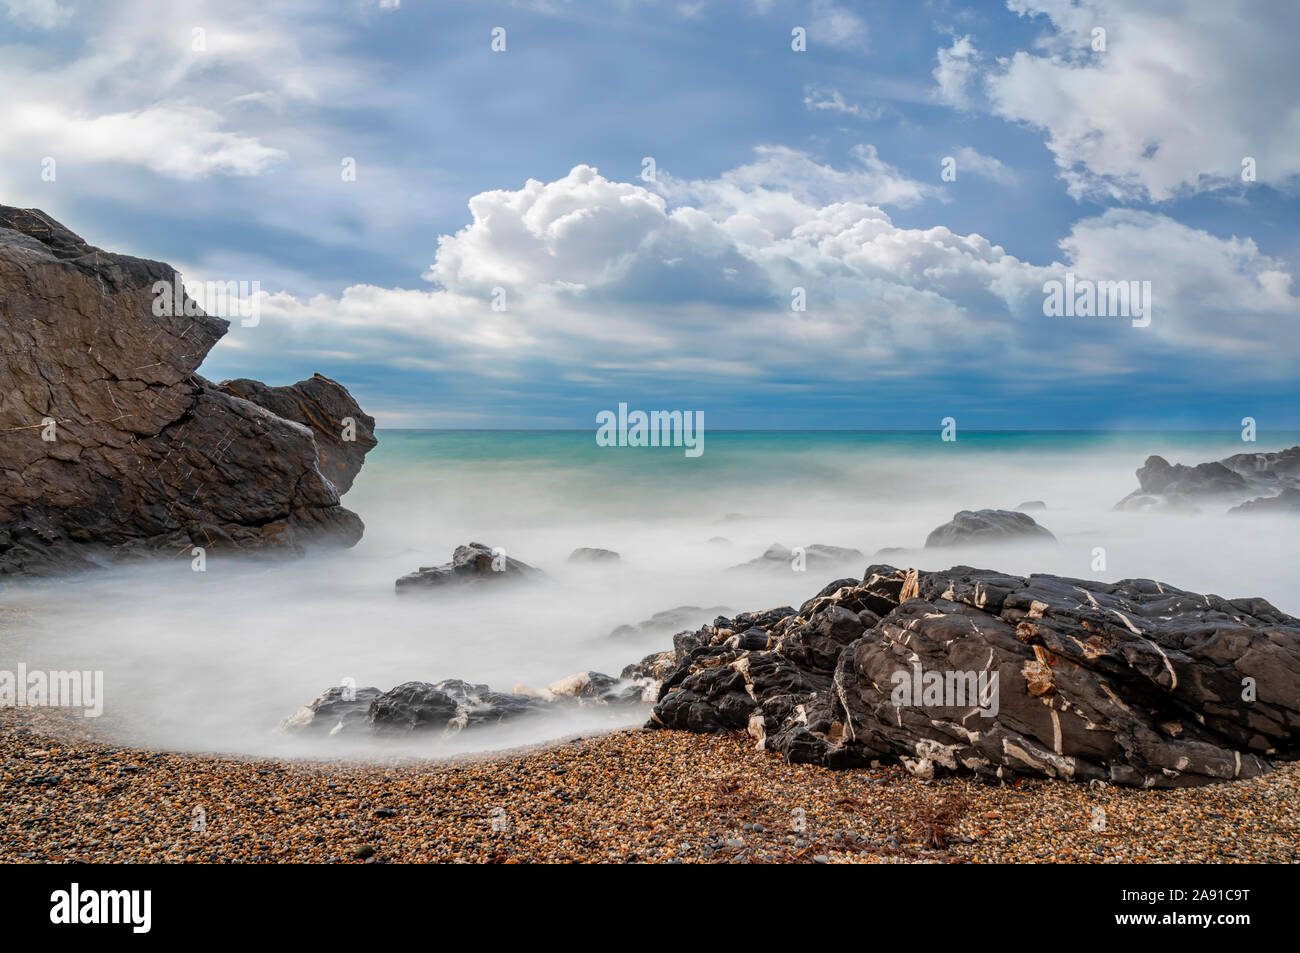 Long exposure of waves breaking on rocks on a sandy beach on the Mediterranean coast in Italy with white cumulus clouds in the sky Stock Photo